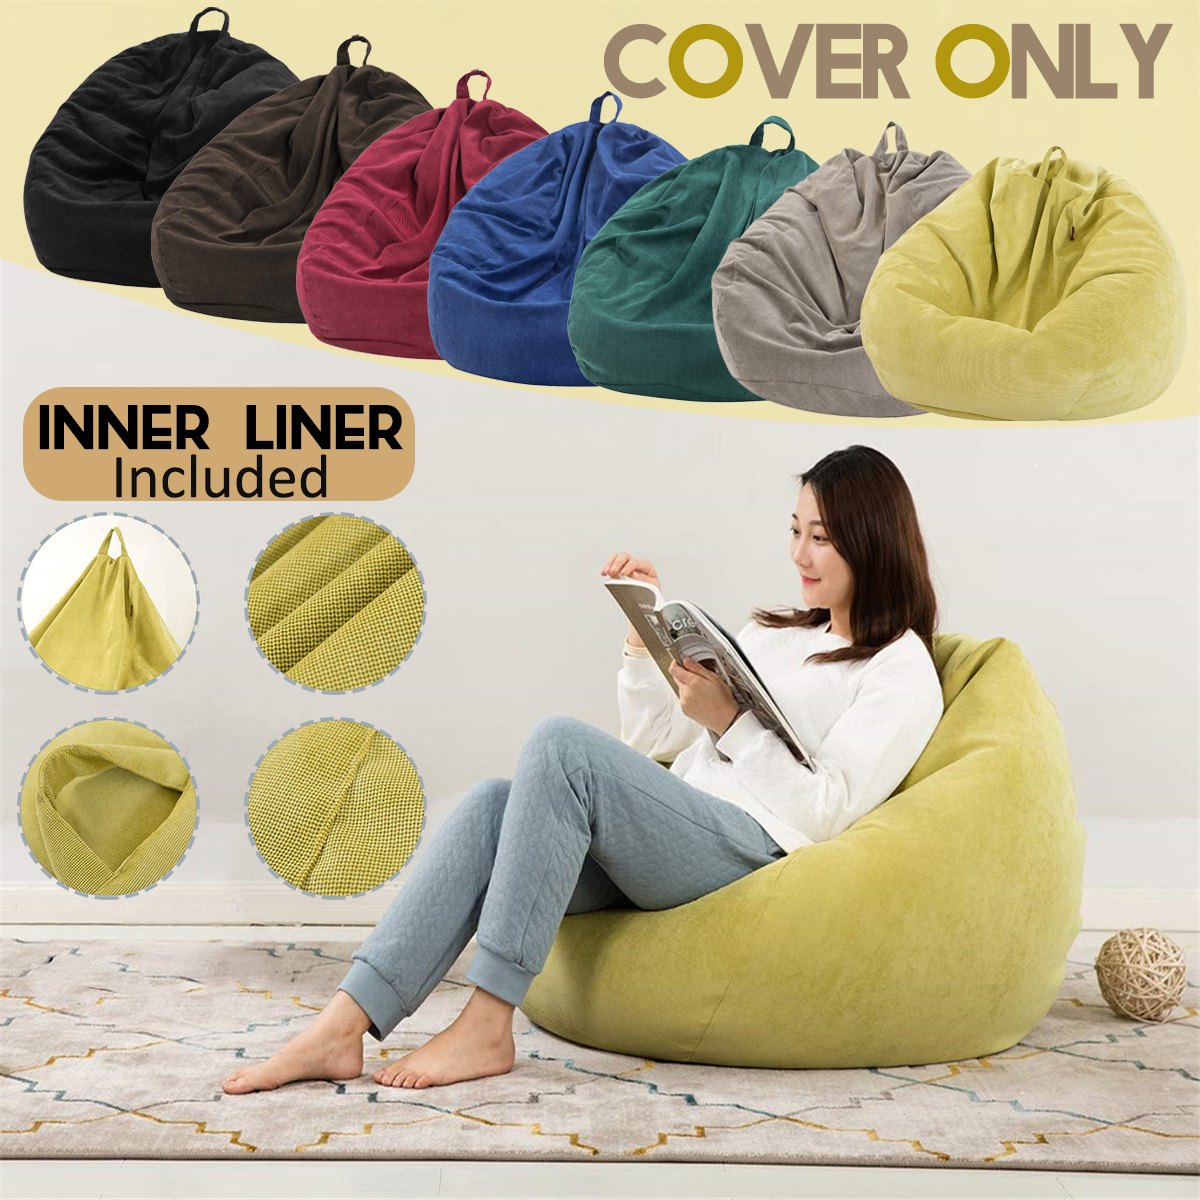 Corduroy Bean Bag Chair 70*80cm Multicolor Gaming Sofa Cover Indoor Lazy Sofa With Mesh Bag Liner Cover 33